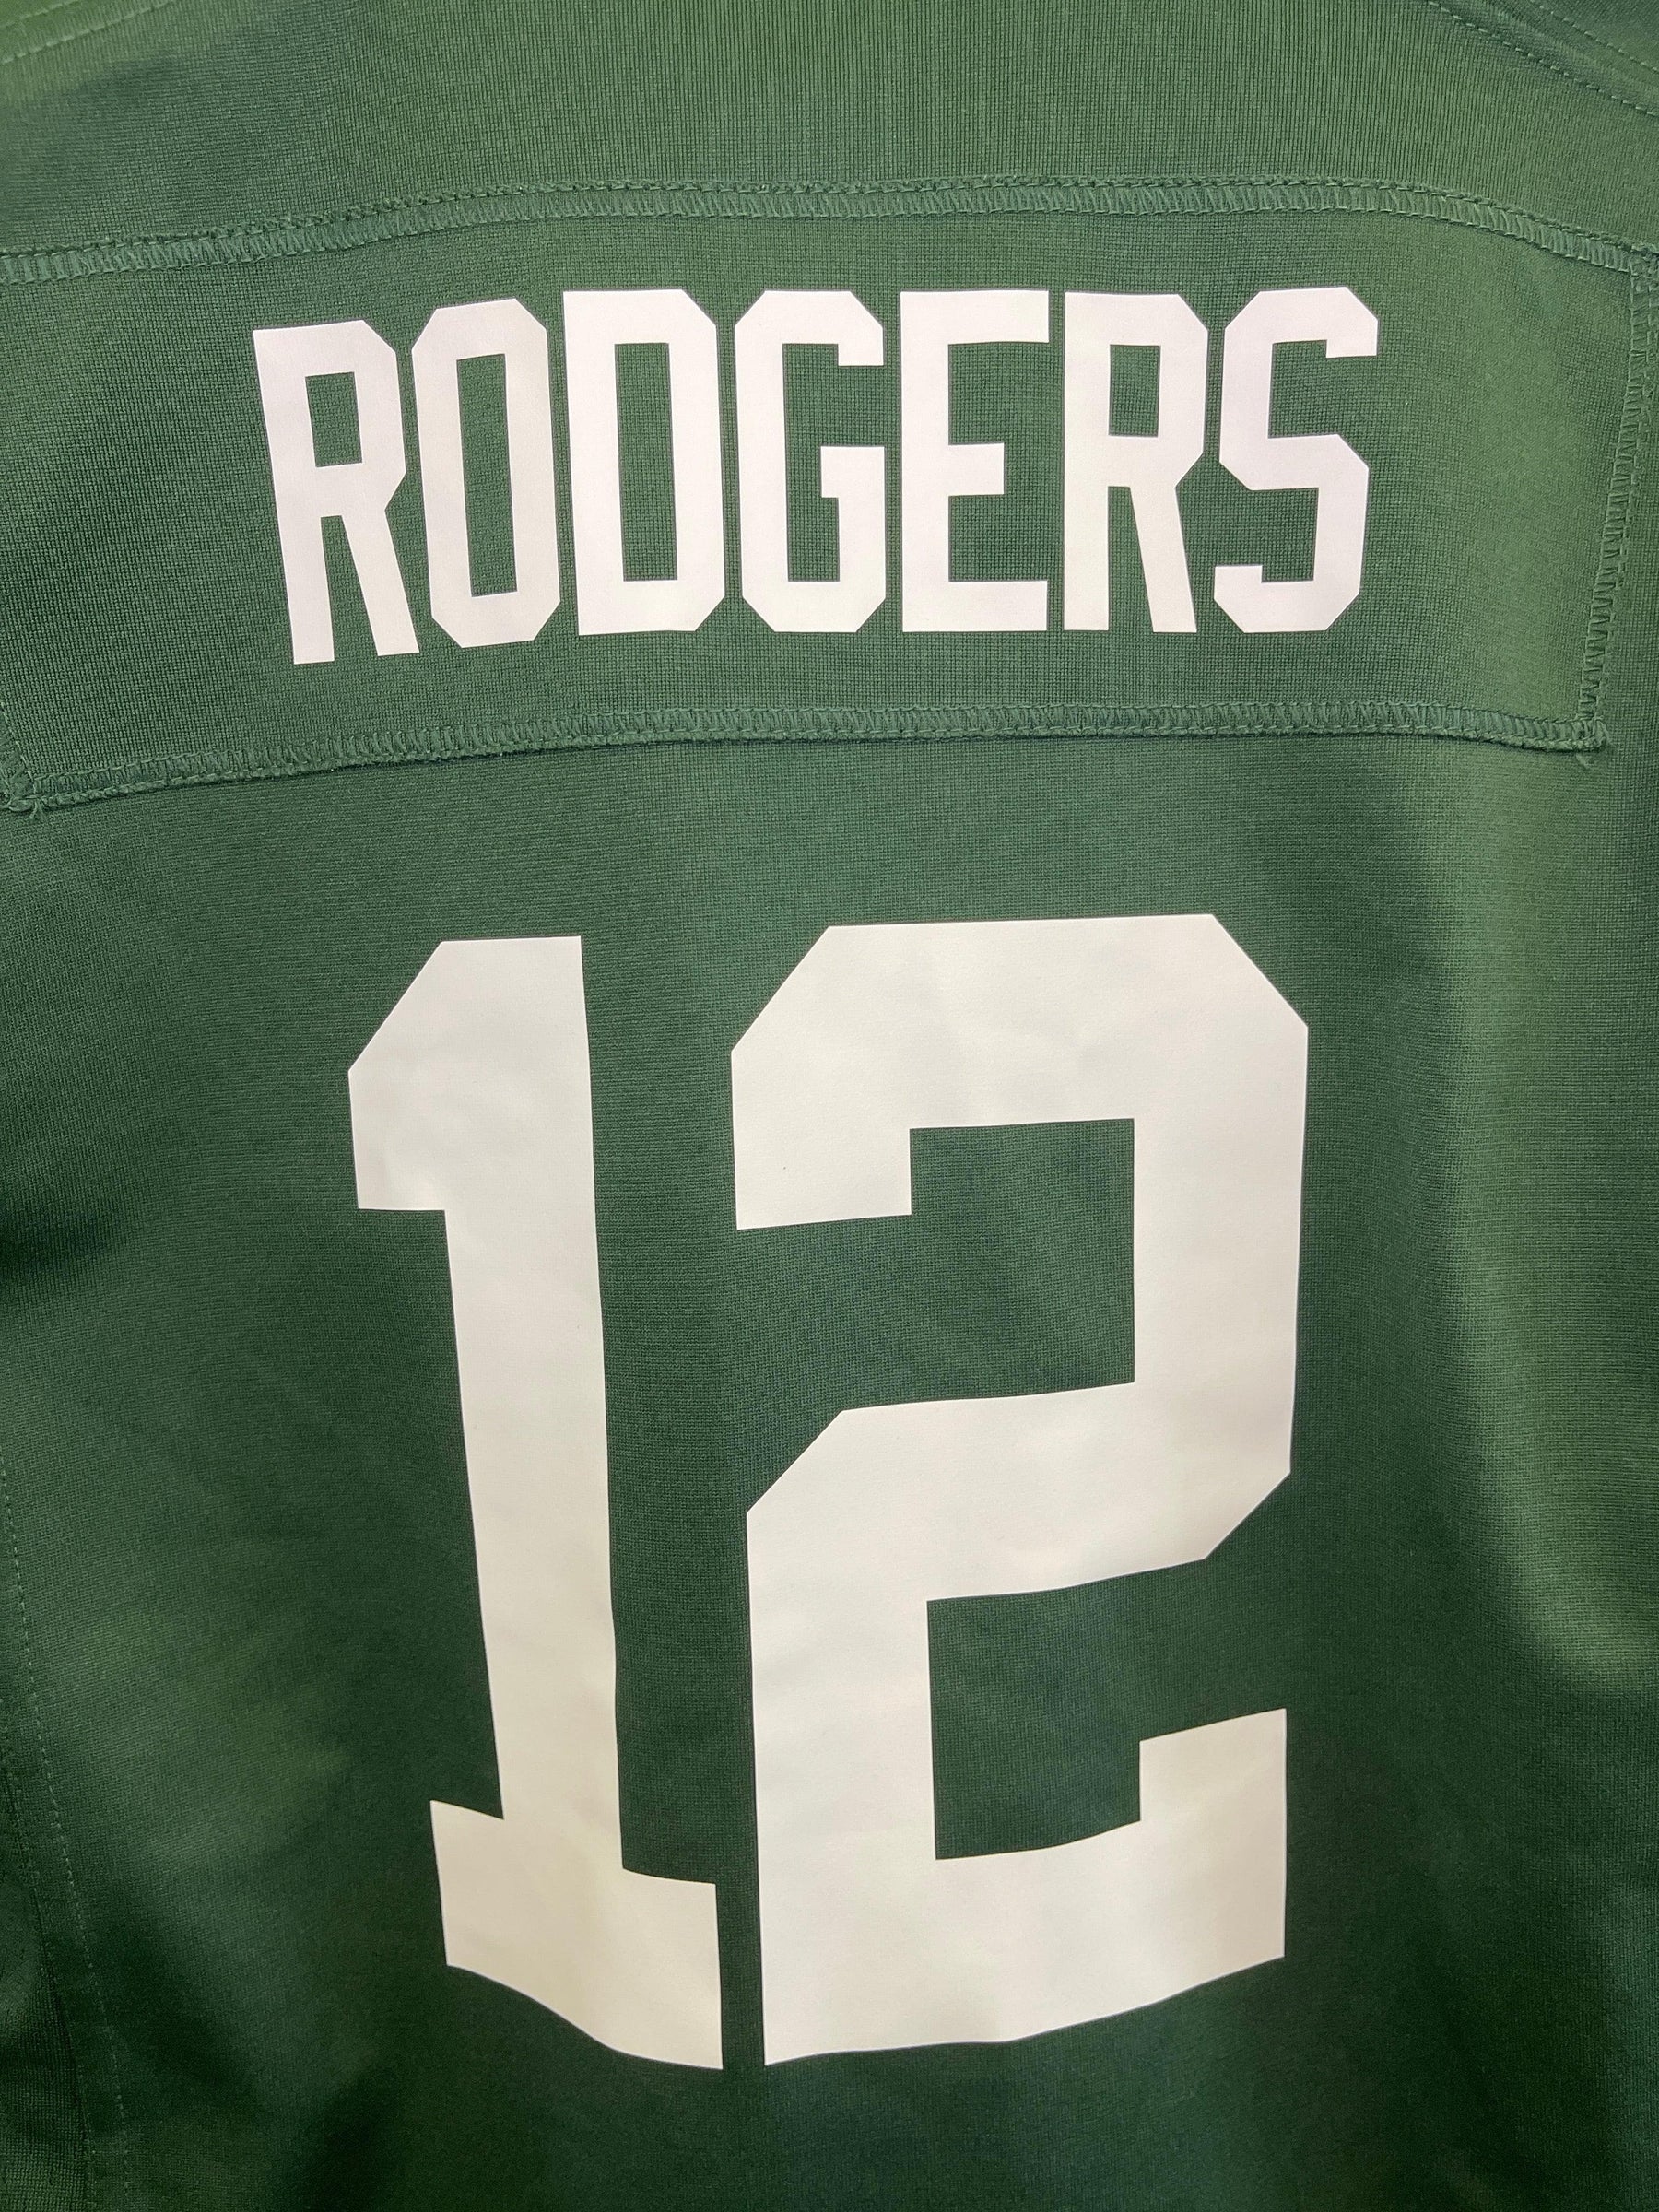 NFL Green Bay Packers Rodgers #12 Game Jersey Youth Large 14-16 NWOT